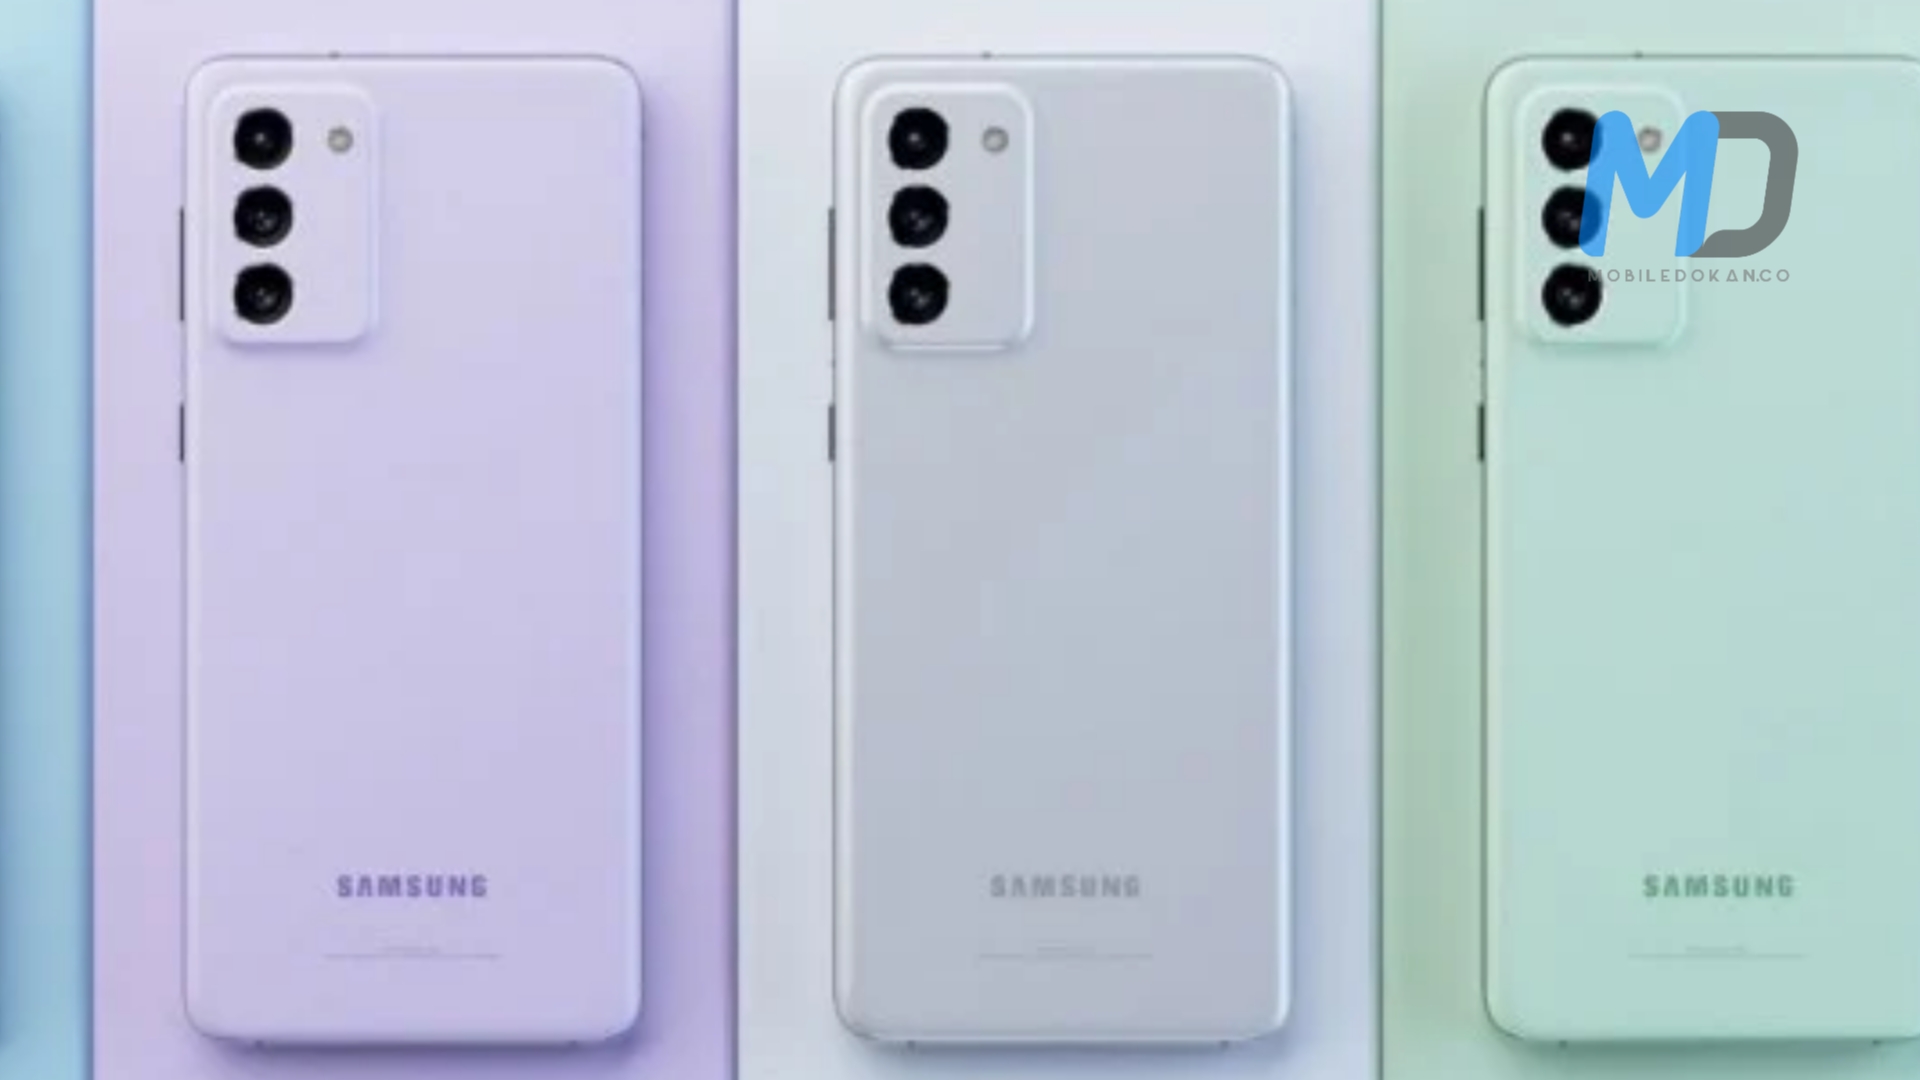 Samsung Galaxy S21 FE expected to launch in January 2022